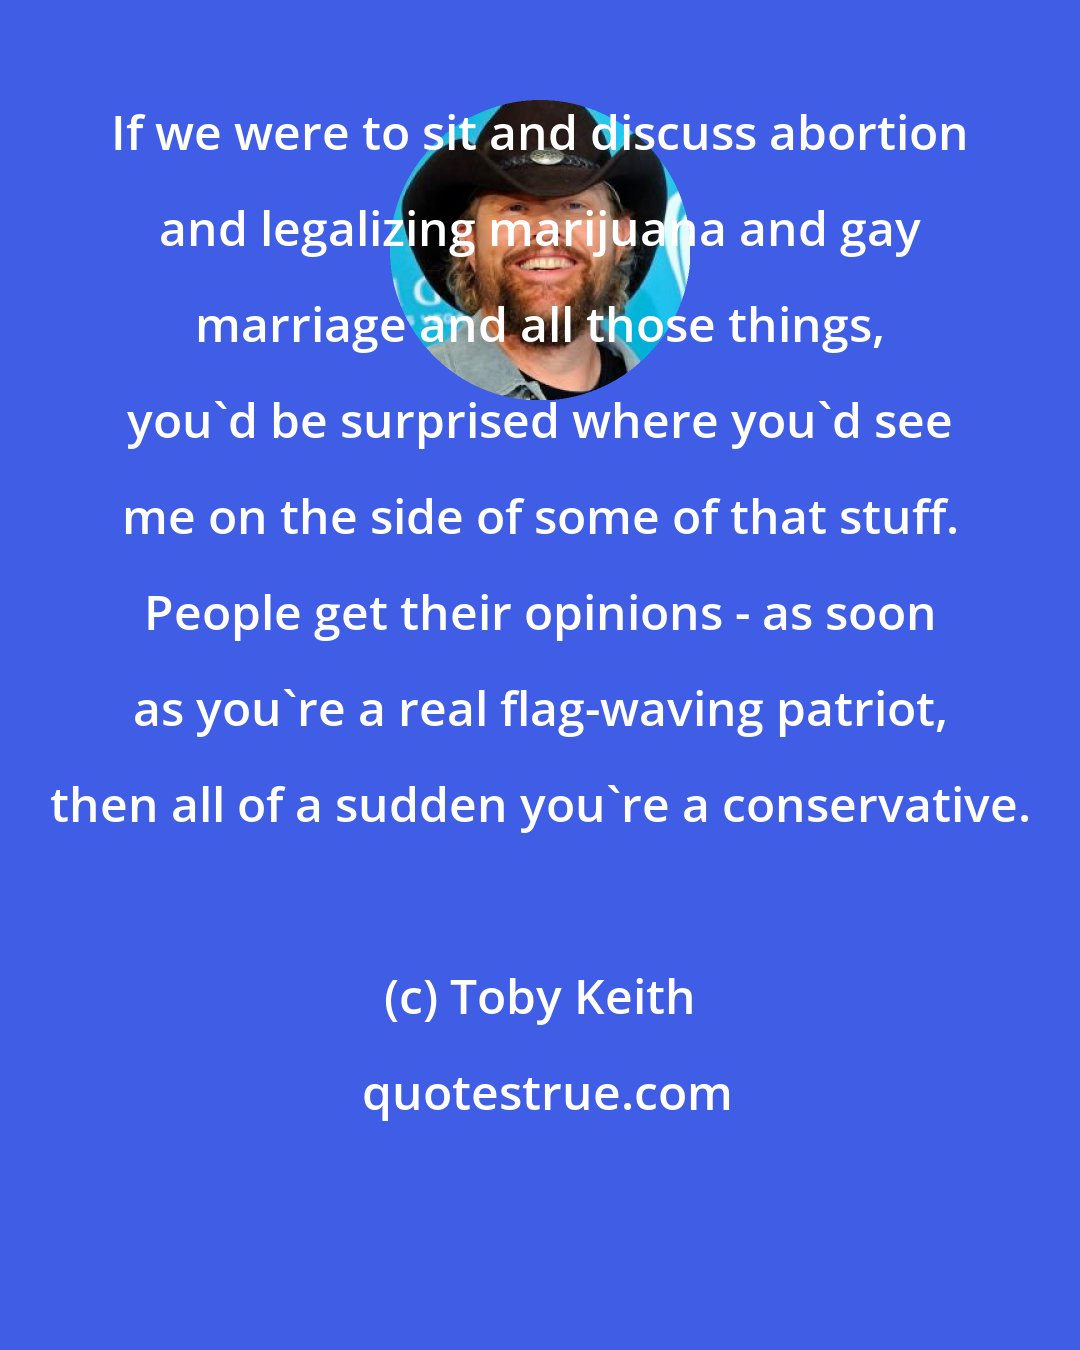 Toby Keith: If we were to sit and discuss abortion and legalizing marijuana and gay marriage and all those things, you'd be surprised where you'd see me on the side of some of that stuff. People get their opinions - as soon as you're a real flag-waving patriot, then all of a sudden you're a conservative.